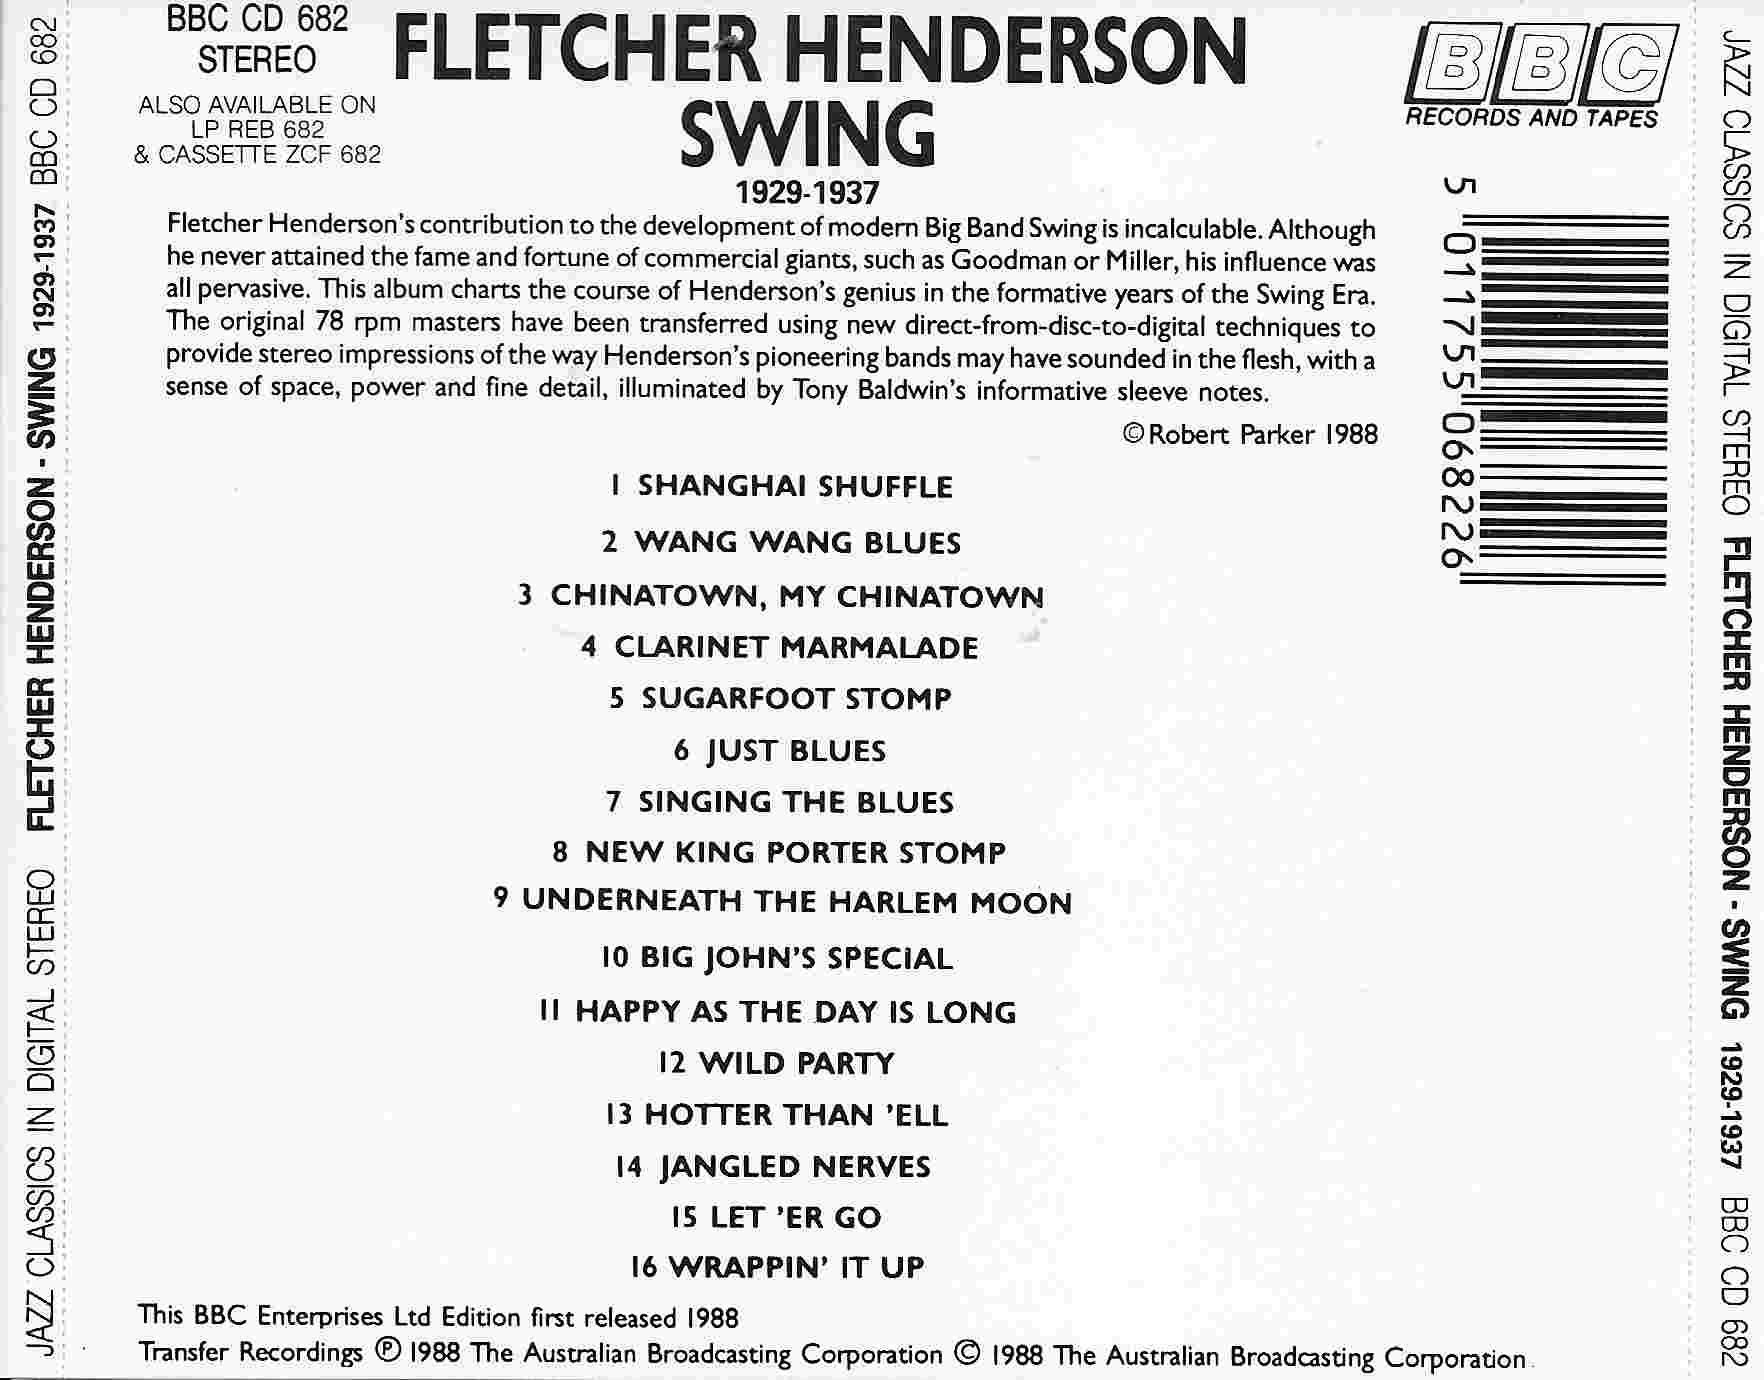 Picture of BBCCD682 Jazz classics - Fletcher Henderson Swing 1929 - 1937 by artist Fletcher Henderson  from the BBC records and Tapes library